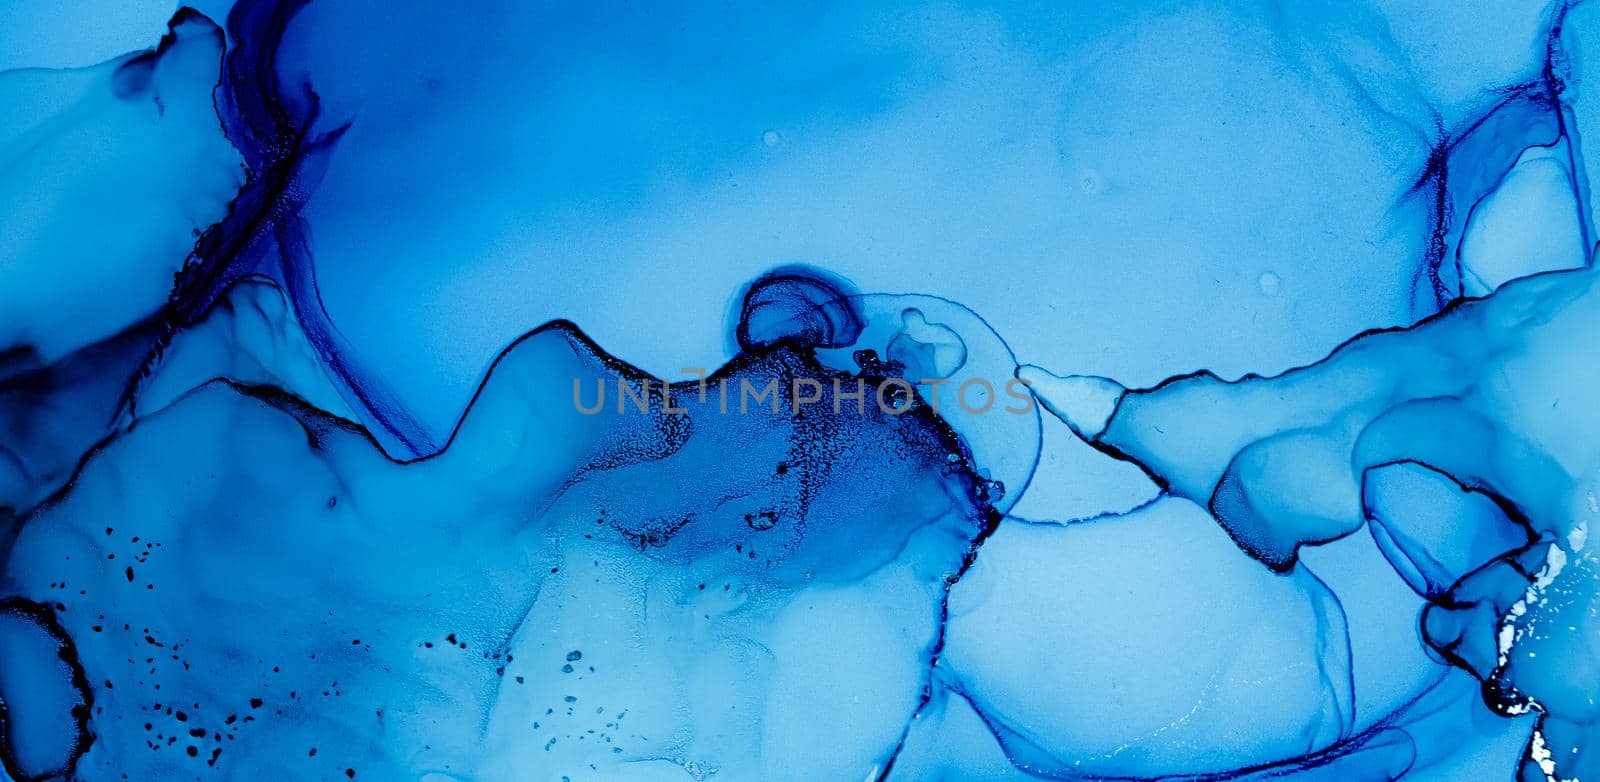 Ink Colours Mix. Fluid Flow Wallpaper. Indigo Alcohol Paint. Ink Colours Mix Water. Ocean Deep Design. Blue Art Pattern. Ethereal Modern Wall. Oil Liquid Print. Marble Mixing Inks.